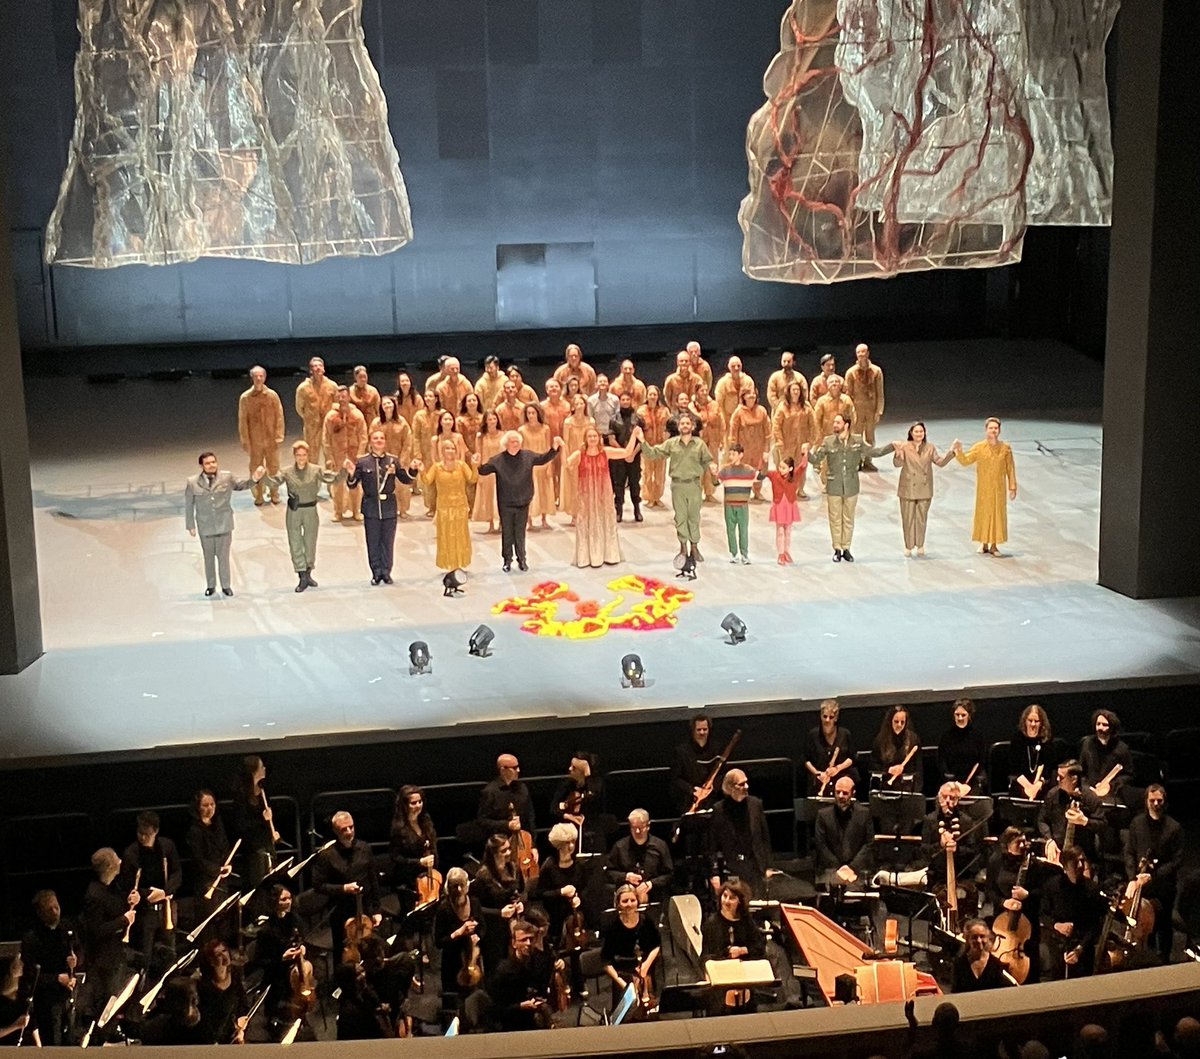 Powerful, provocative ‘Médée’ @StaatsoperBLN: are crimes of the heart worse than those of the hand? @barockorchester @SirSimonRattle in sensuous form.  Dramatic contrast between Magdalena Kožená’s unfettered Medea & the sensitive dignity of @SampsonCarolyn’s Creusa: both superb.